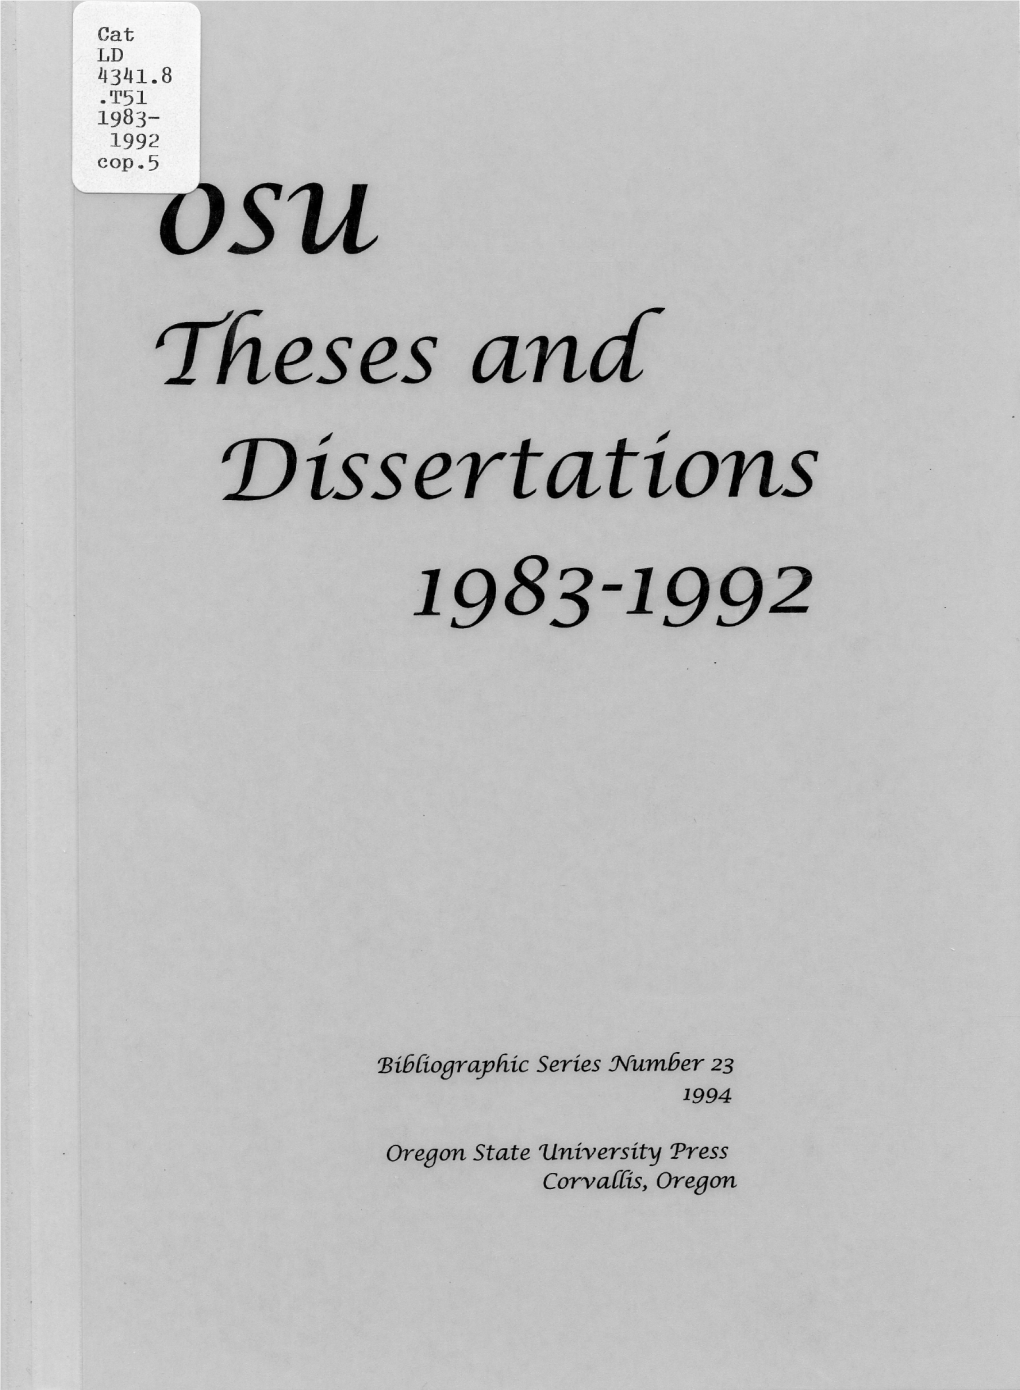 Theses and Dissertations 1983-1992